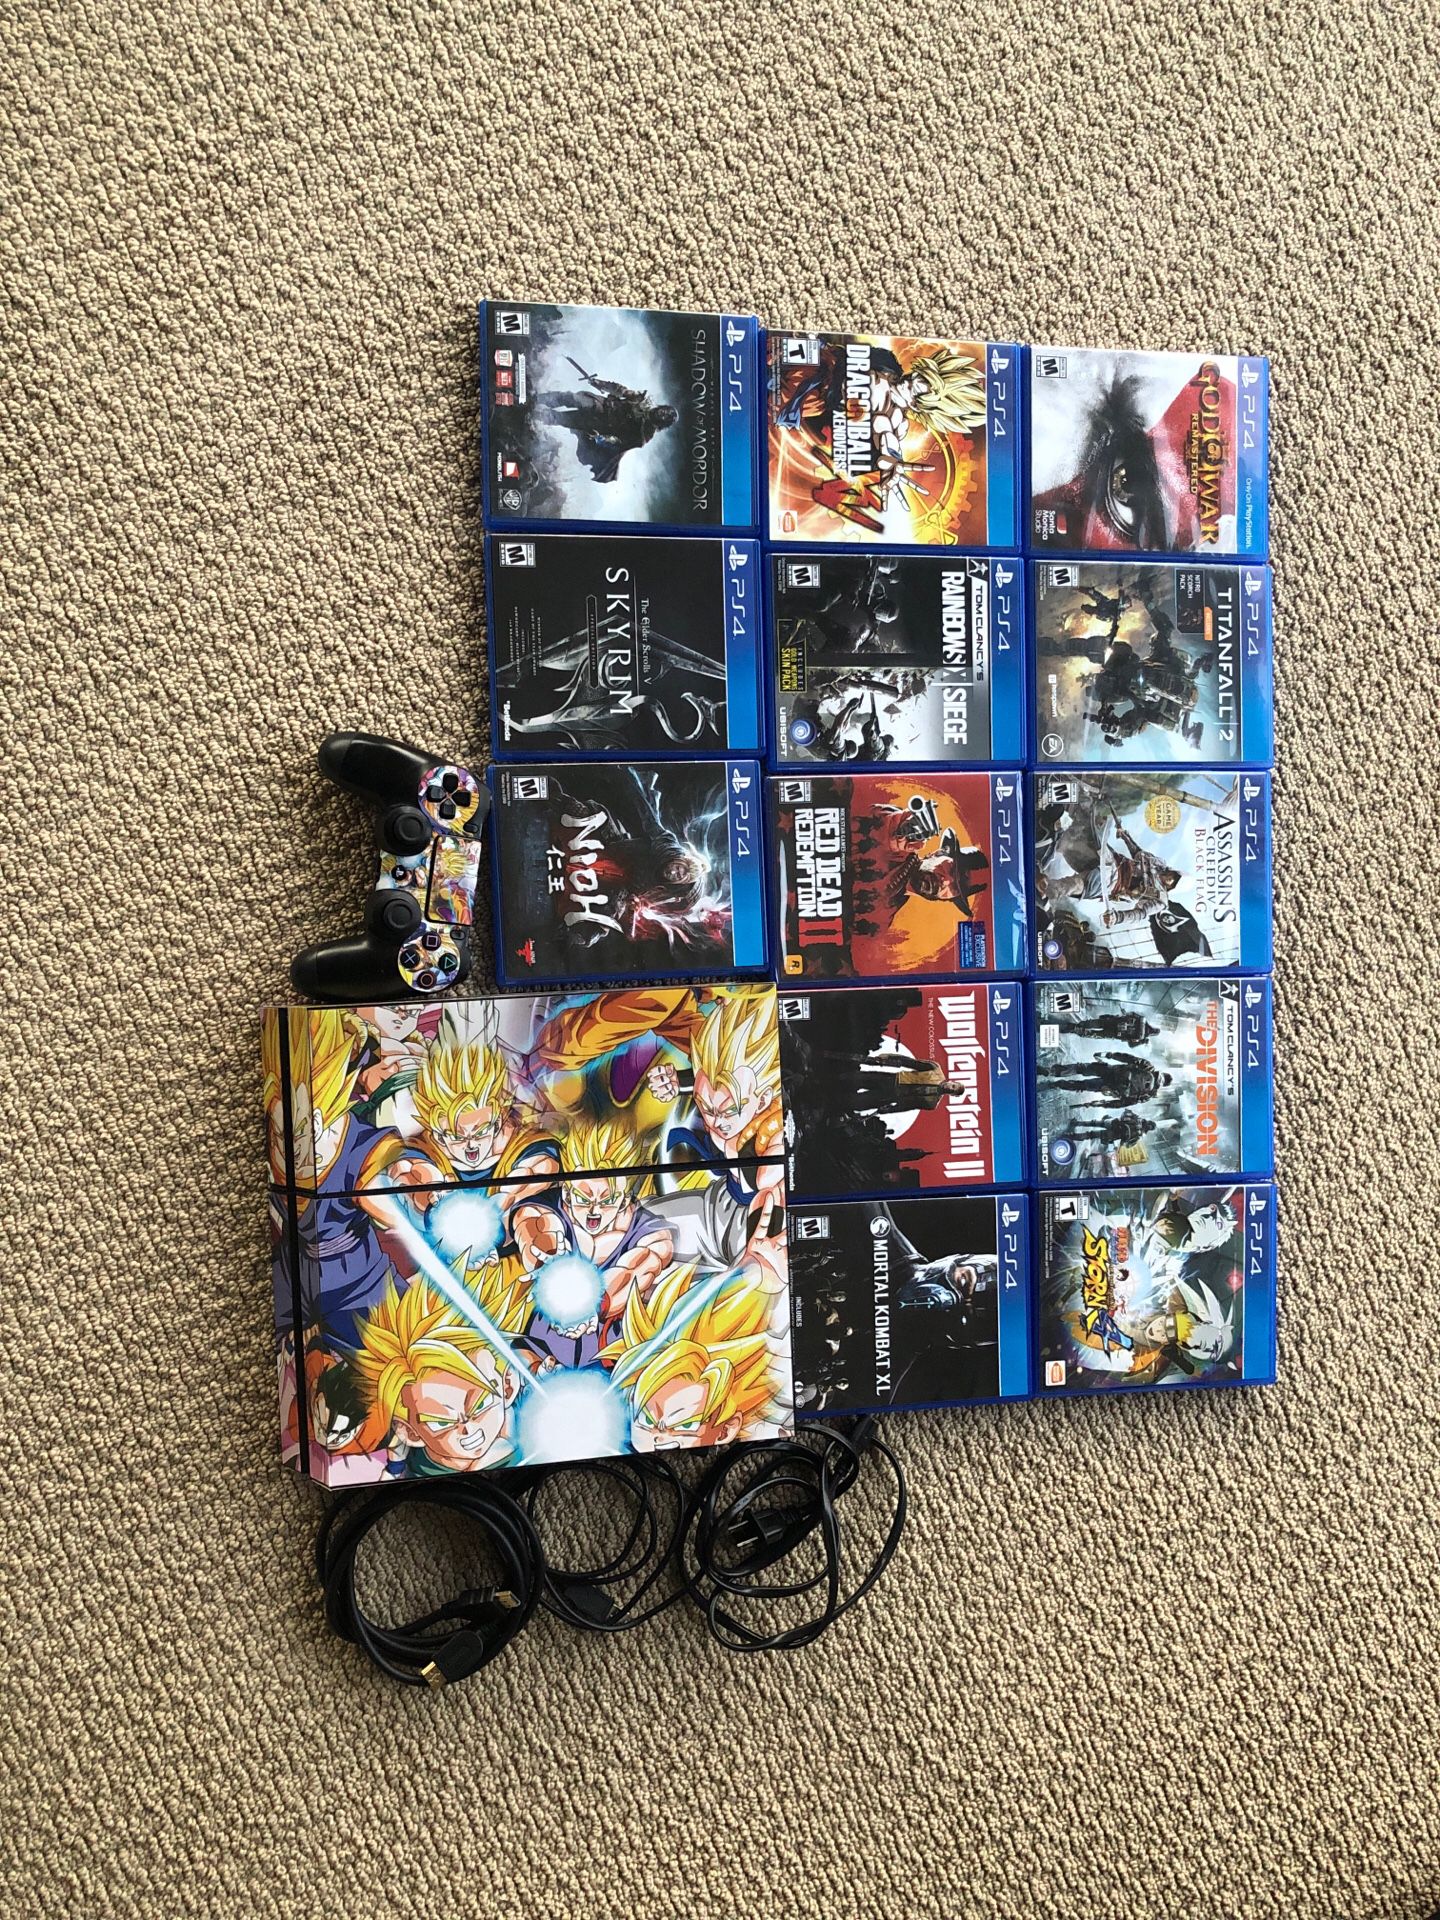 Sony PS4 with games